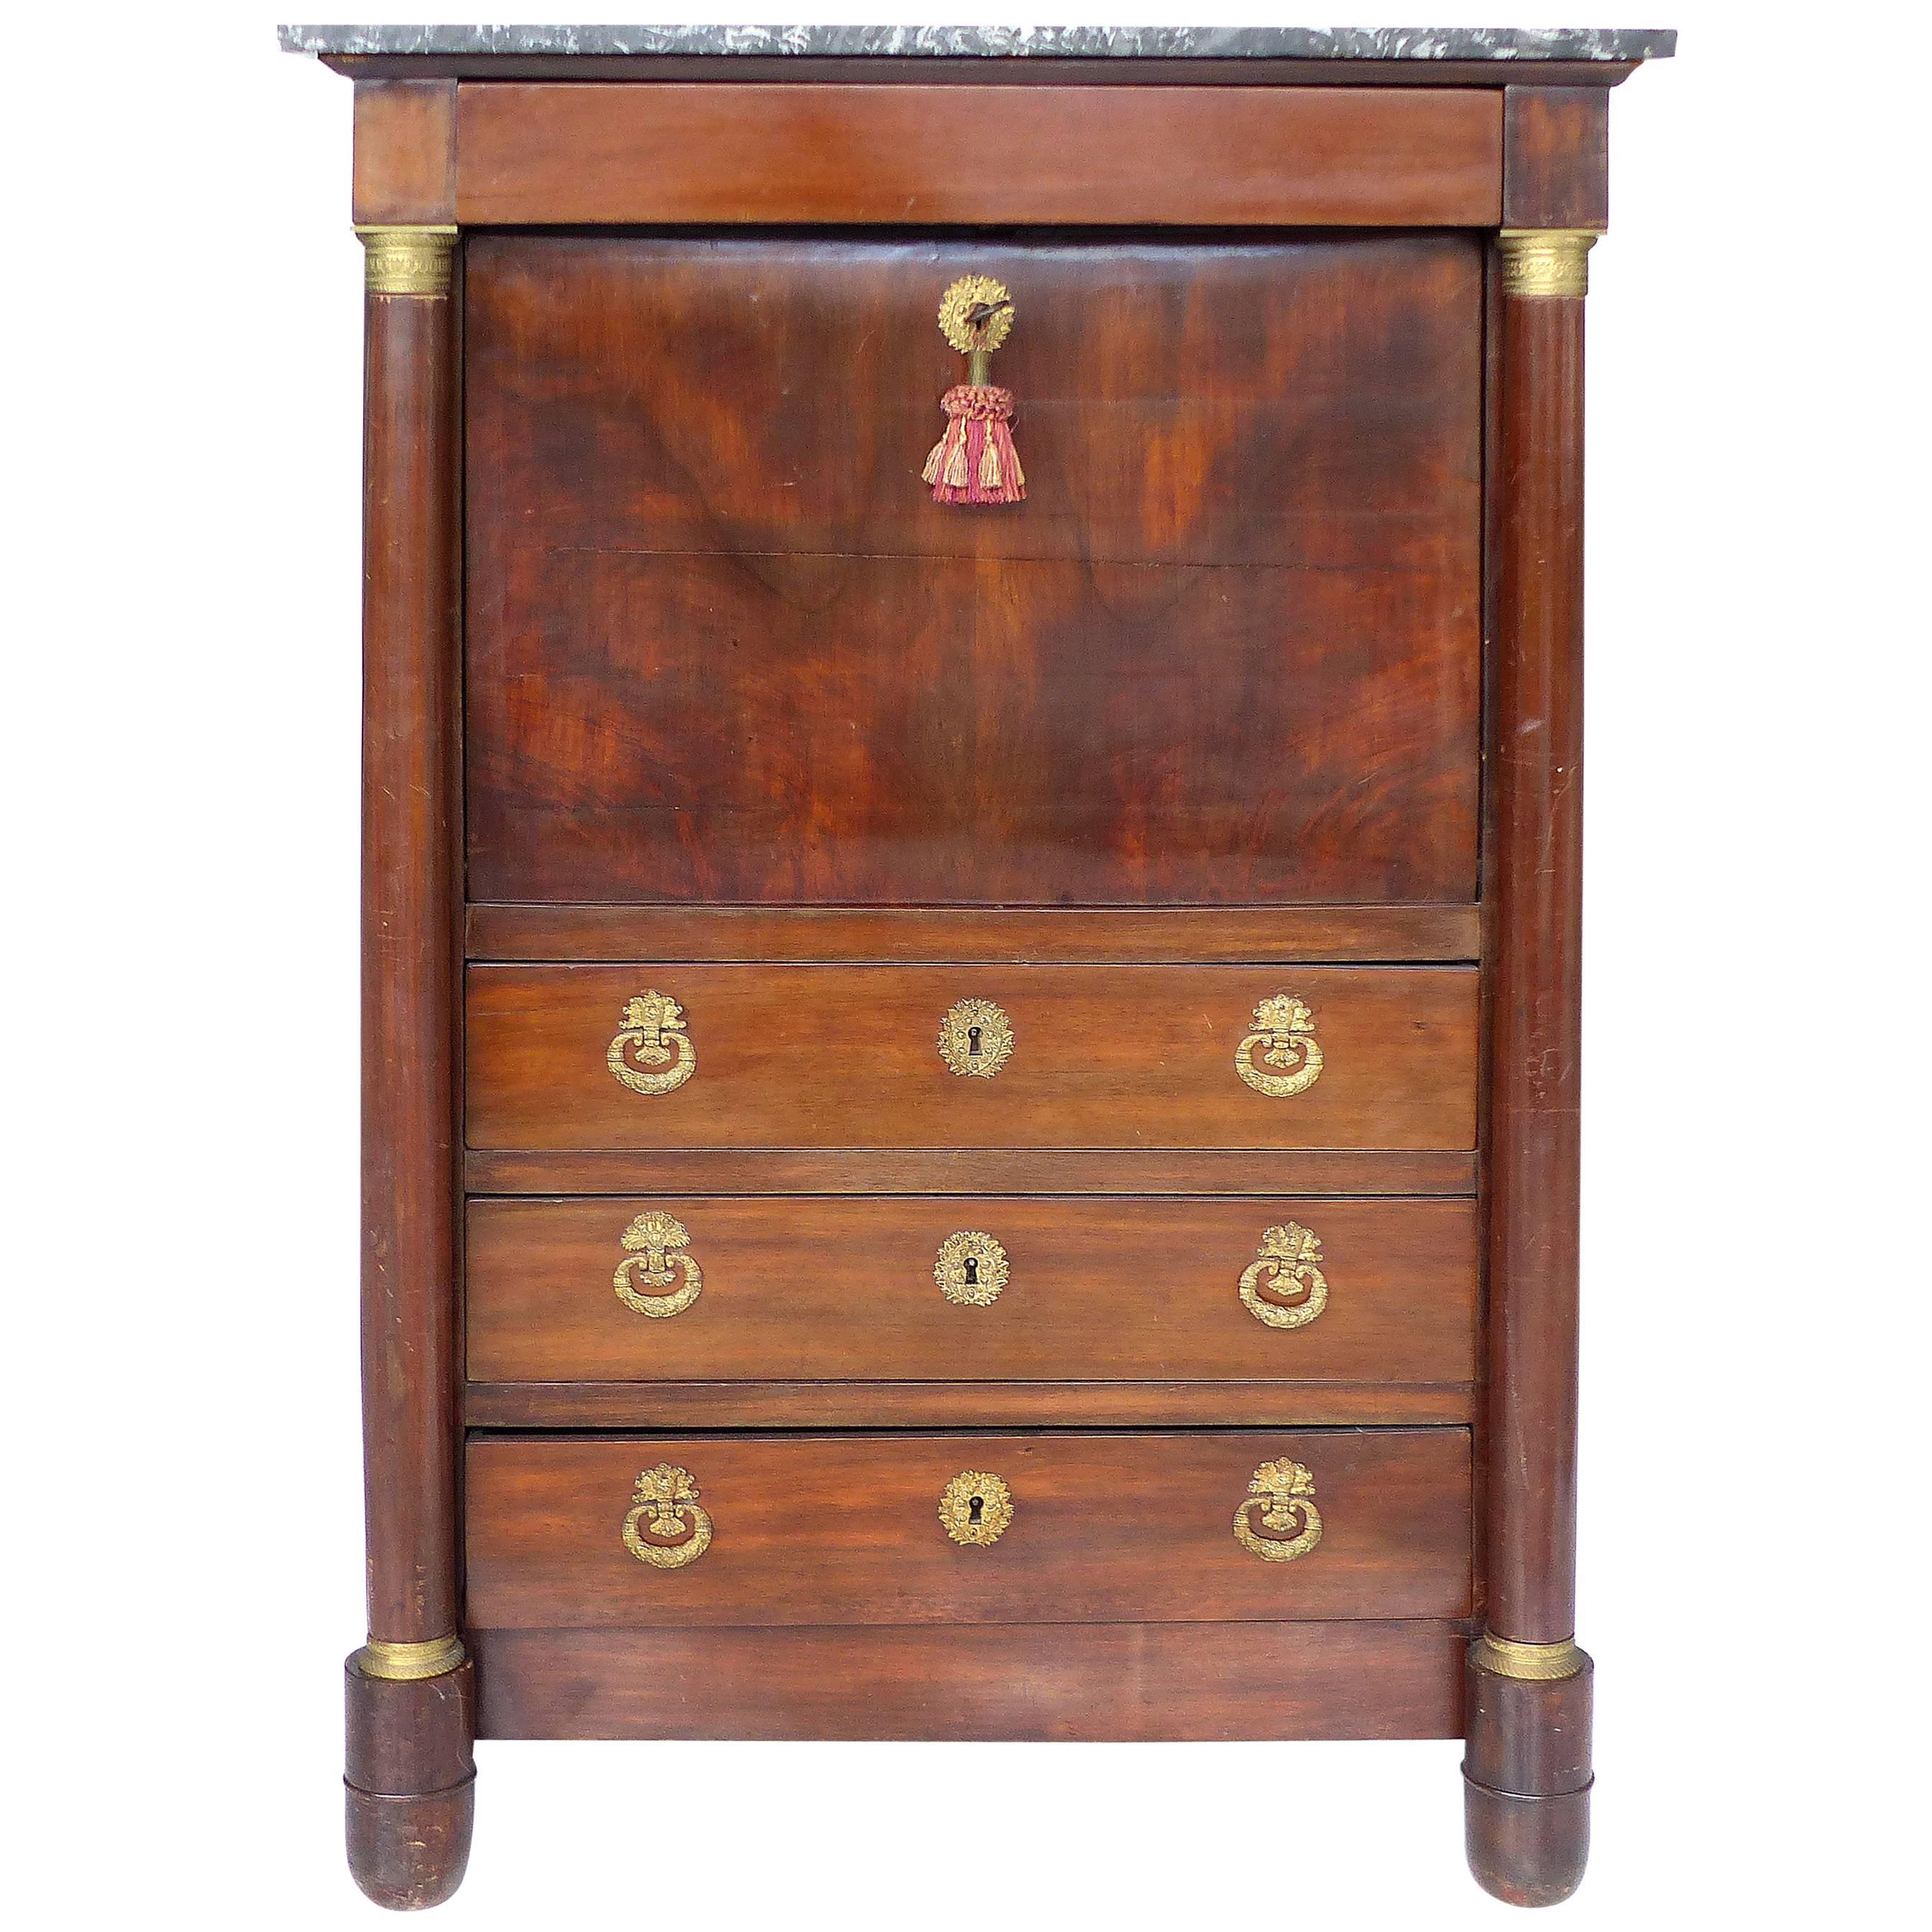 19th Century French Empire Drop Front Secretary with Bronze Mounts